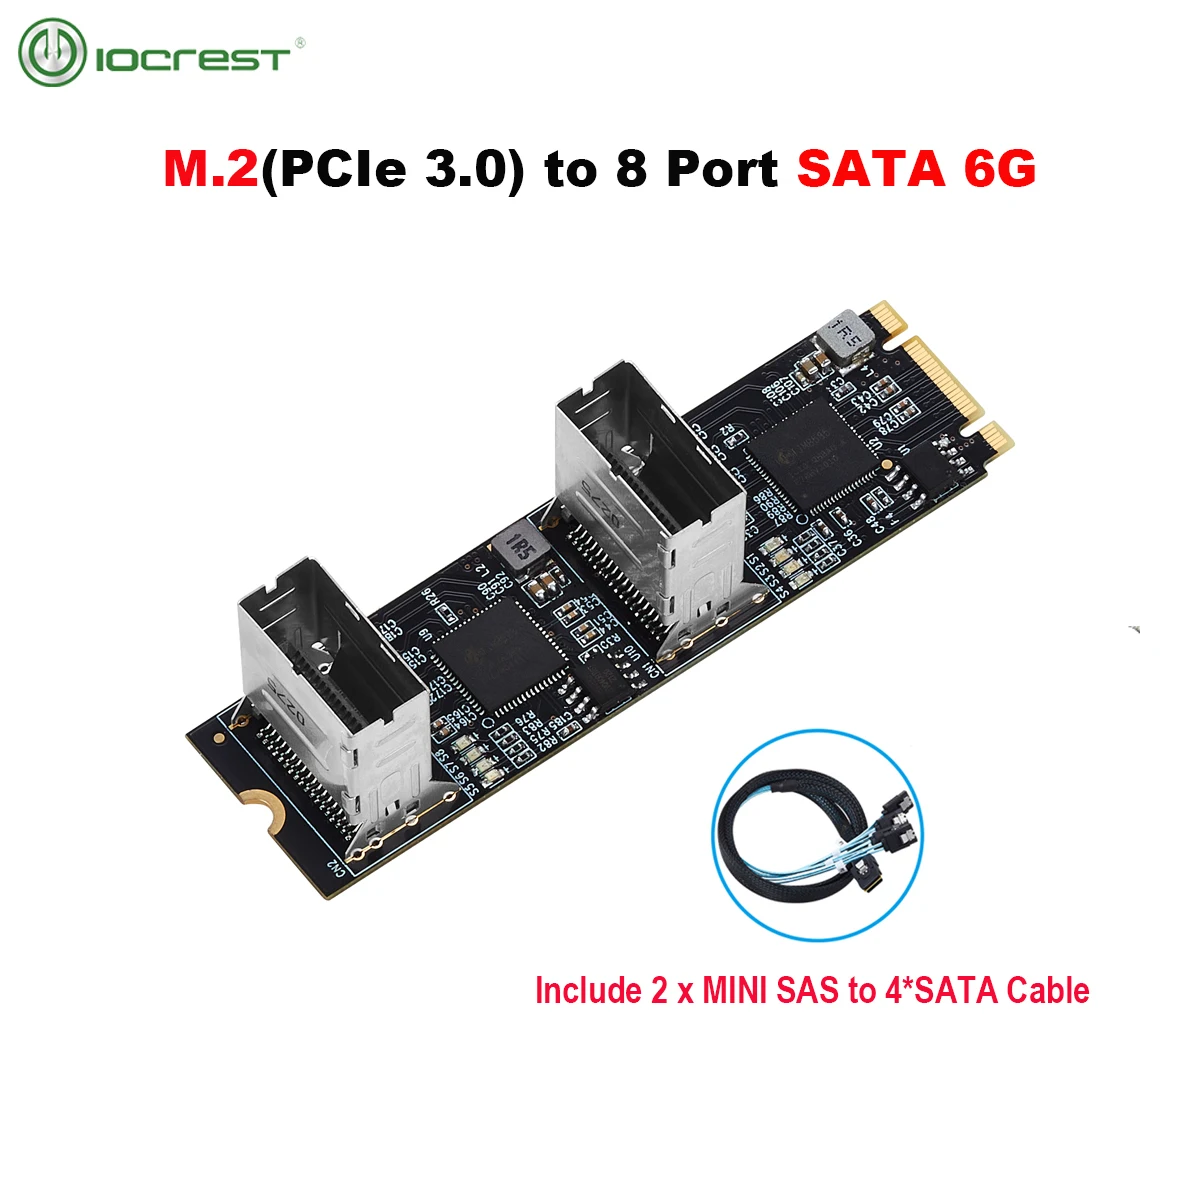 IOCREST M.2 PCIe3.0 to 8 Ports SATA 6G Multiplier Controller Card B/M key NGFF Each Port Arrive 6Gbps with 2 Mini SAS Interface